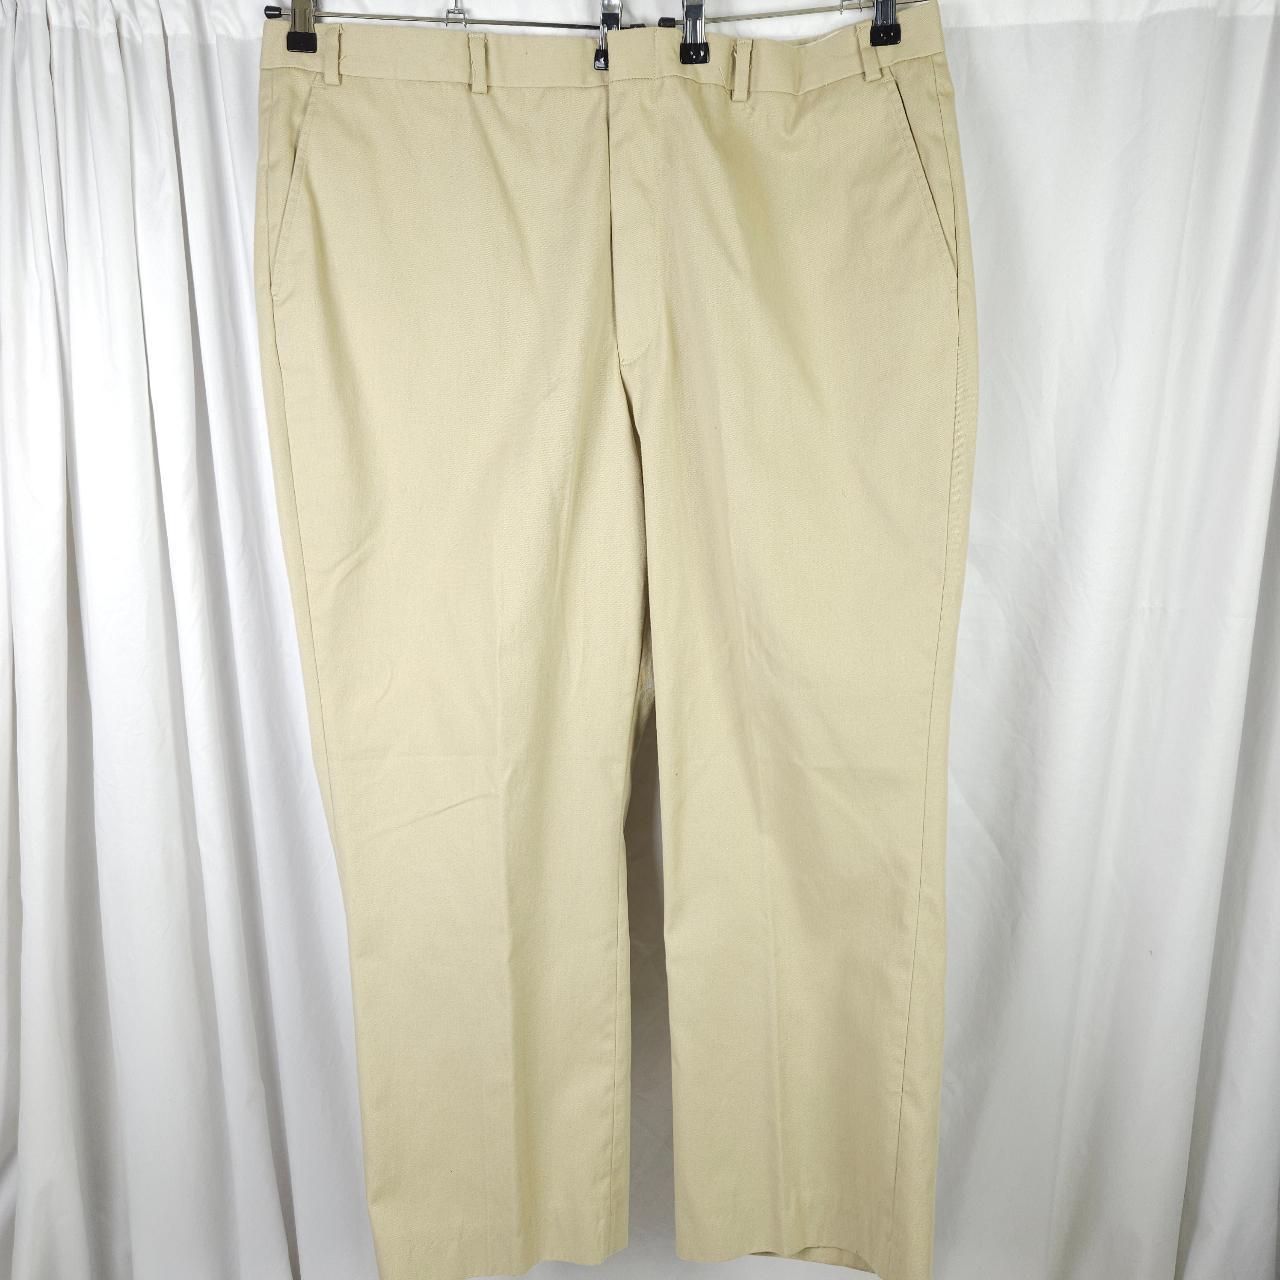 Vintage L.L. Bean Mens Chino Beige Pants Made In USA...